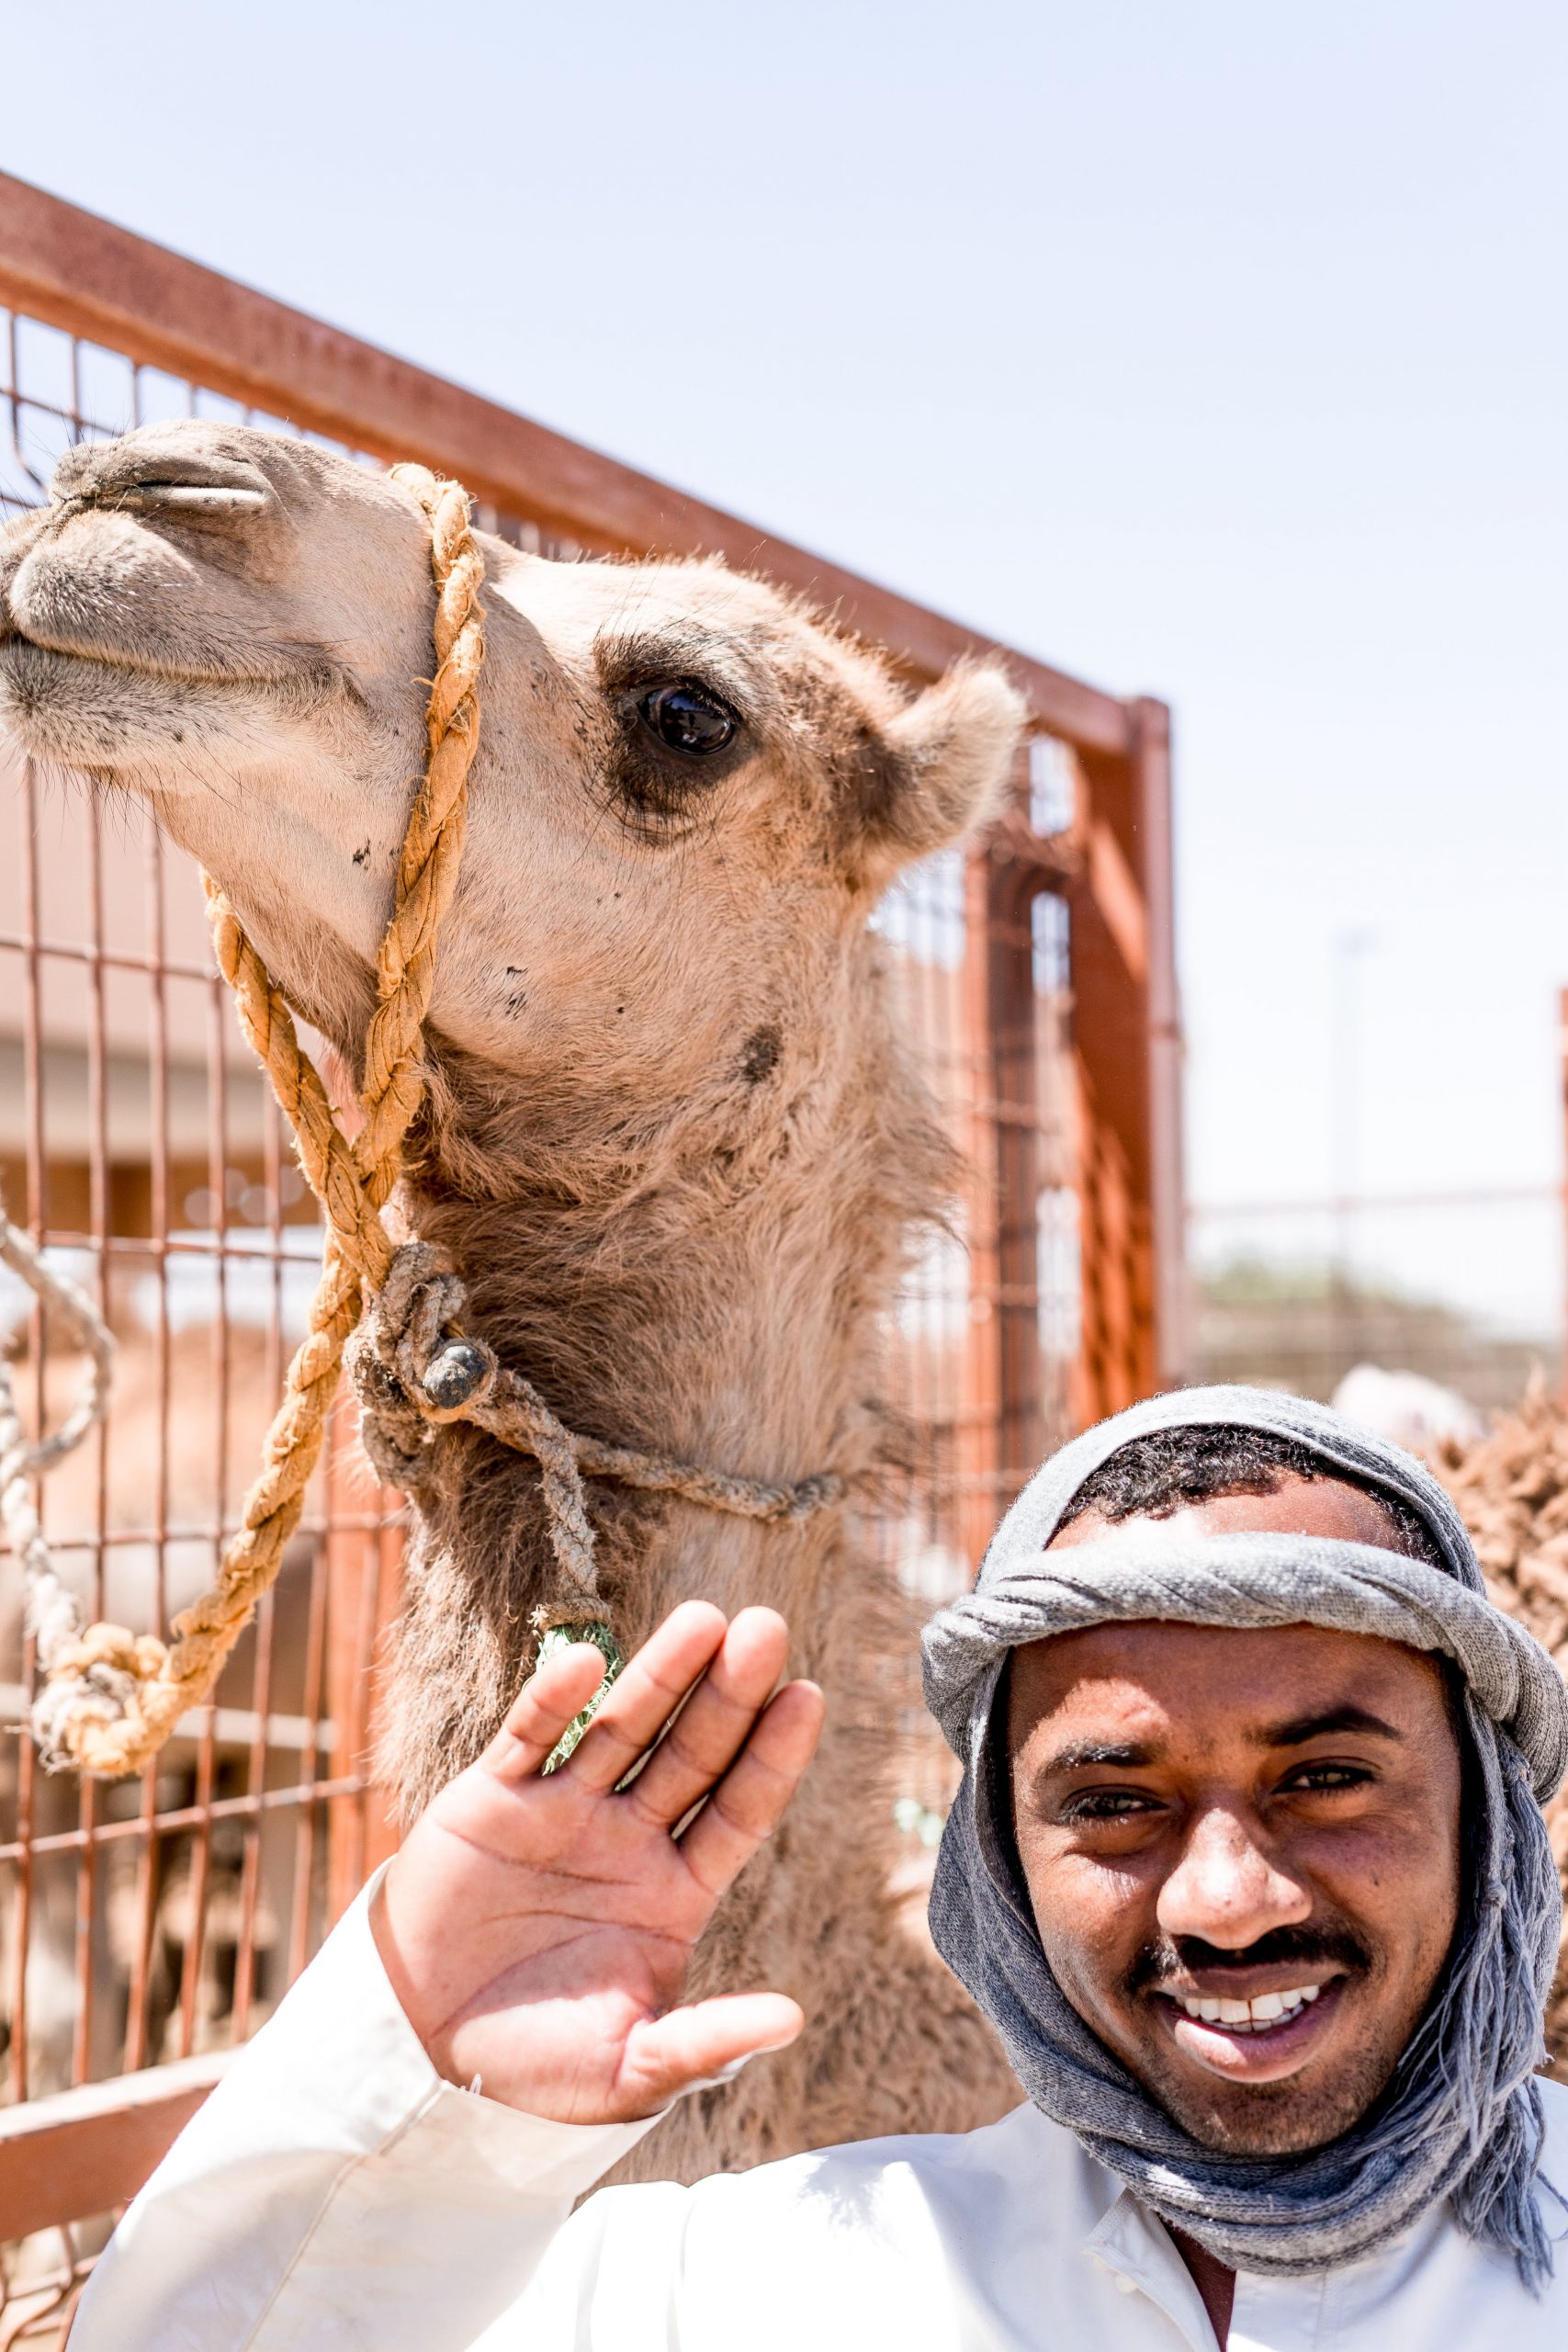 Greeting man and his camel